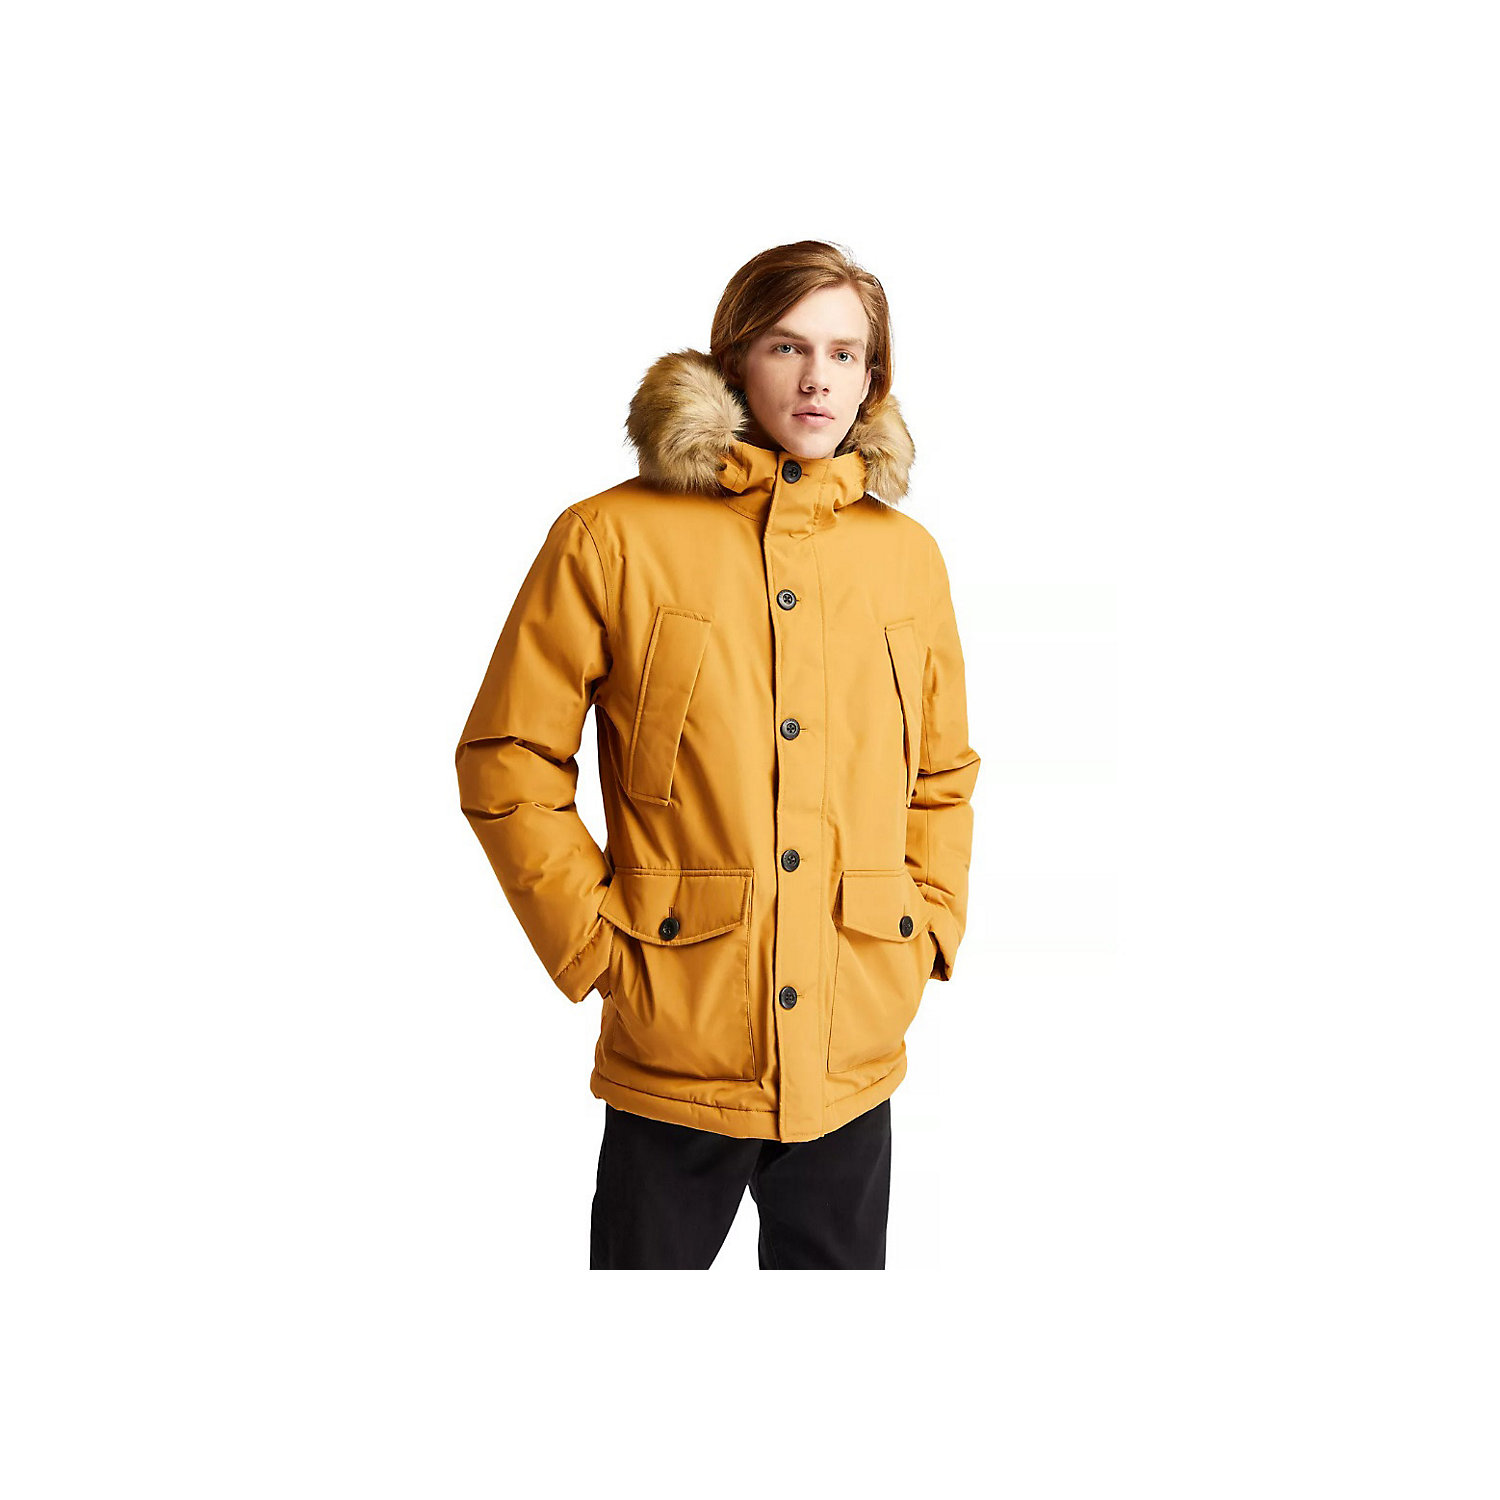 Timberland Mens Scar Ridge Parka with Dryvent Technology